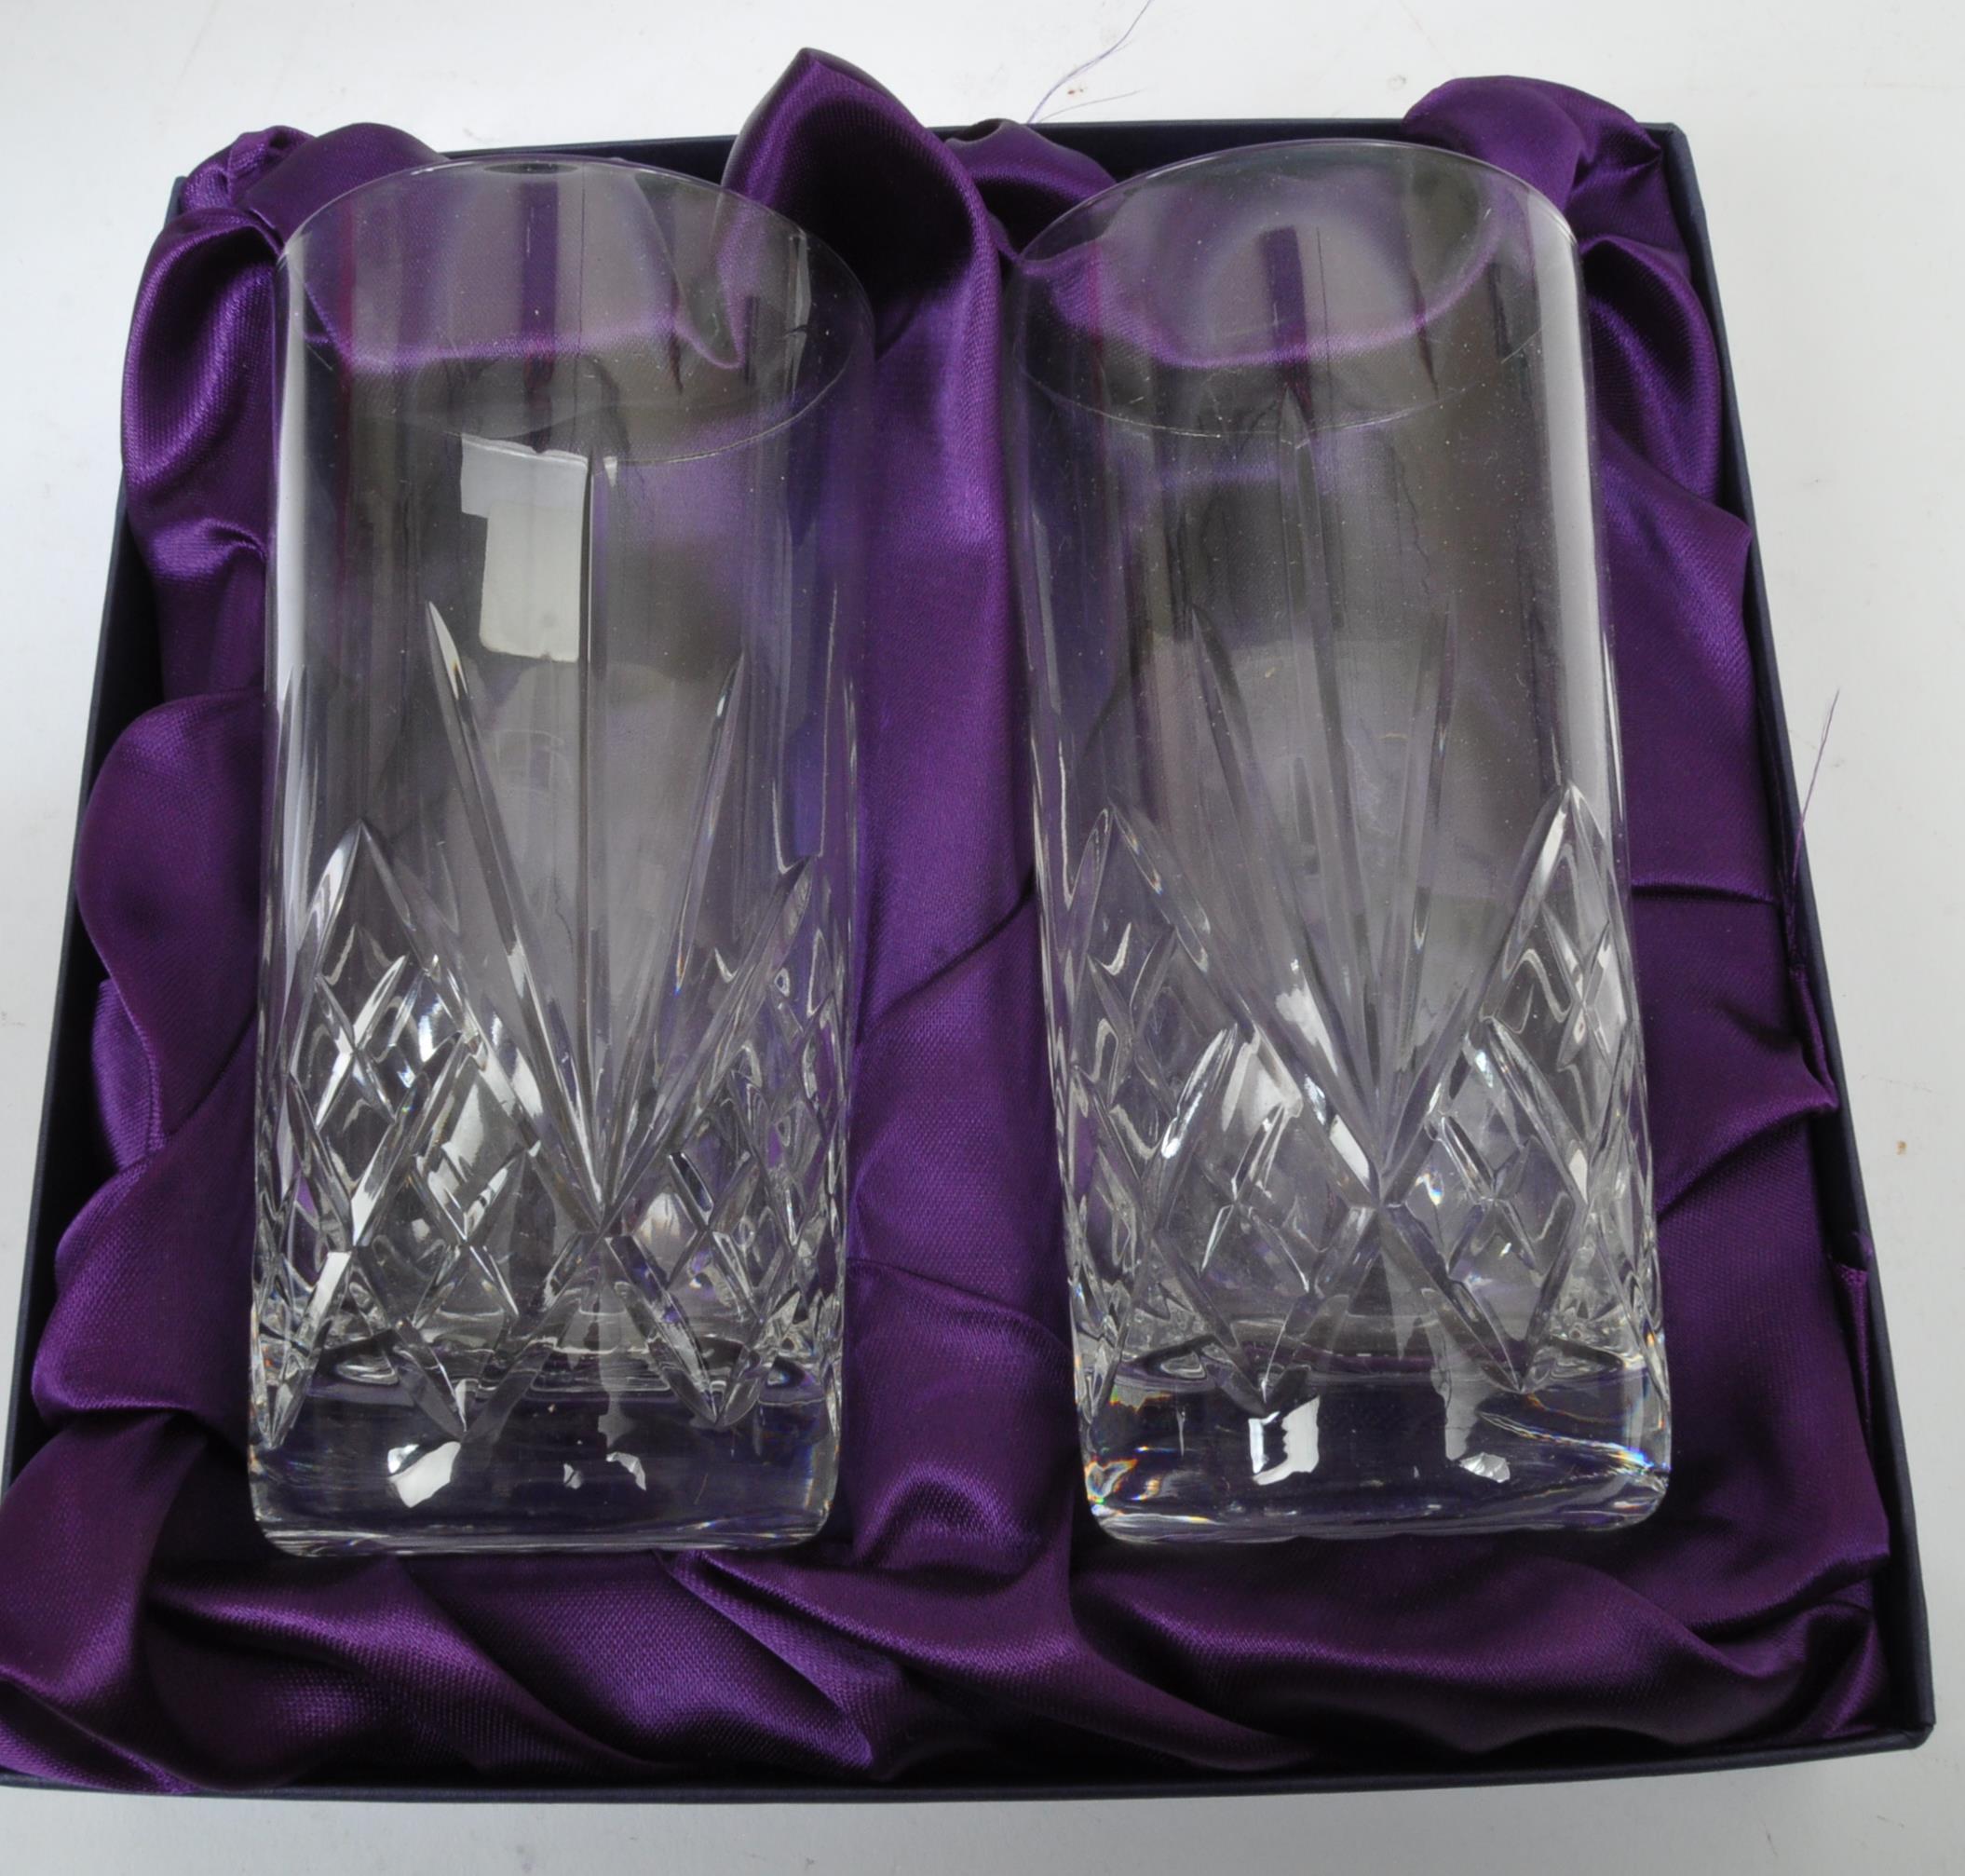 NOS ROYAL SCOT CRYSTAL HAND CUT DRINKING GLASSES - Image 5 of 5